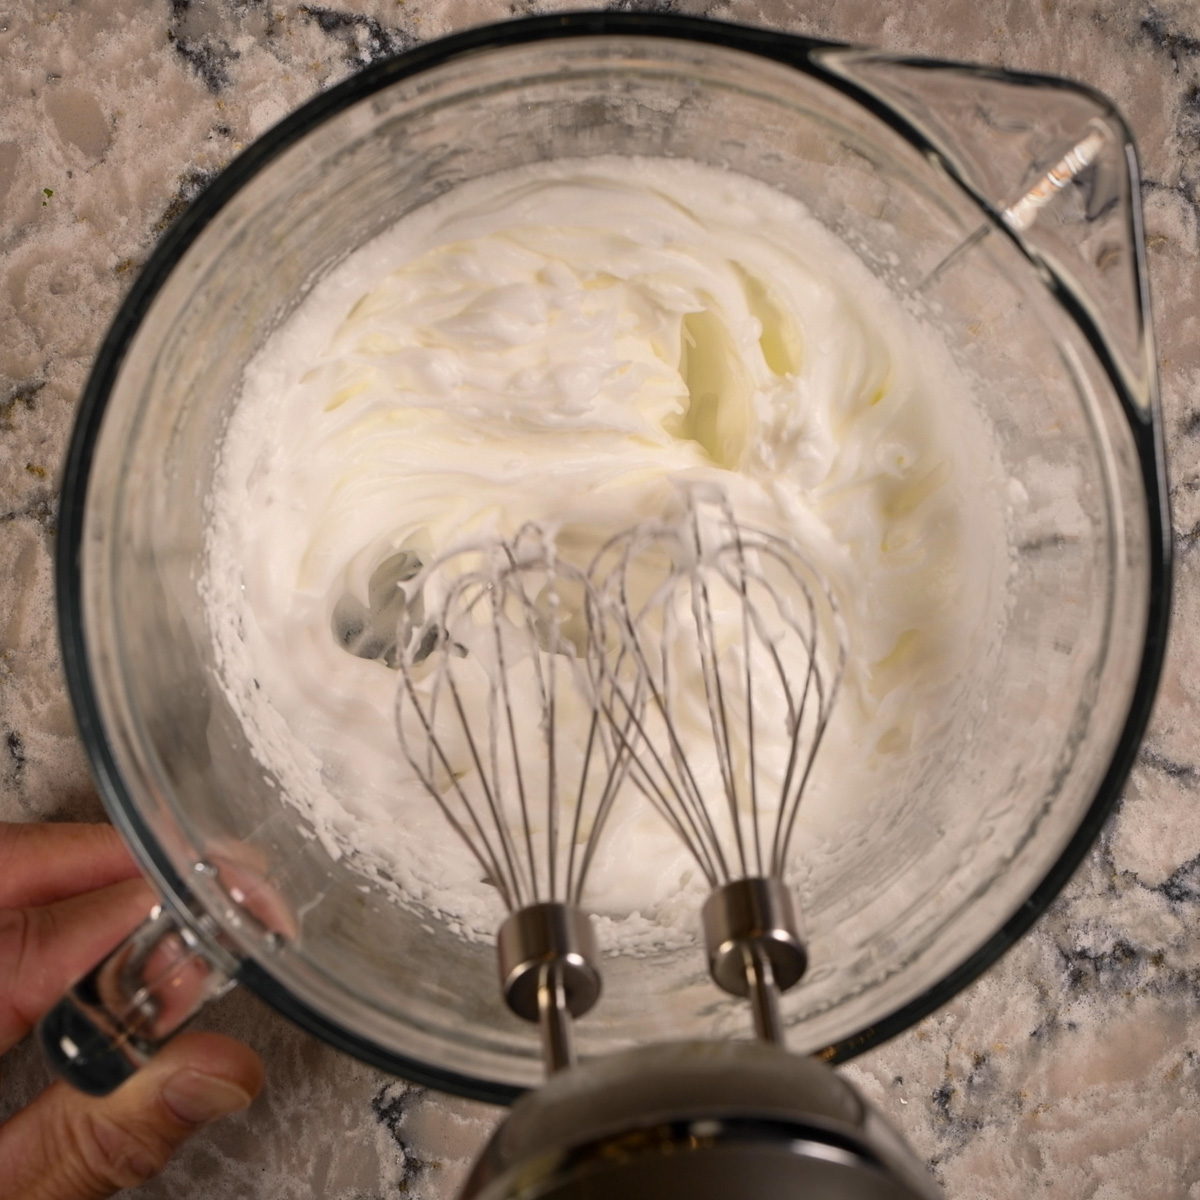 Whip egg whites in a separate bowl.